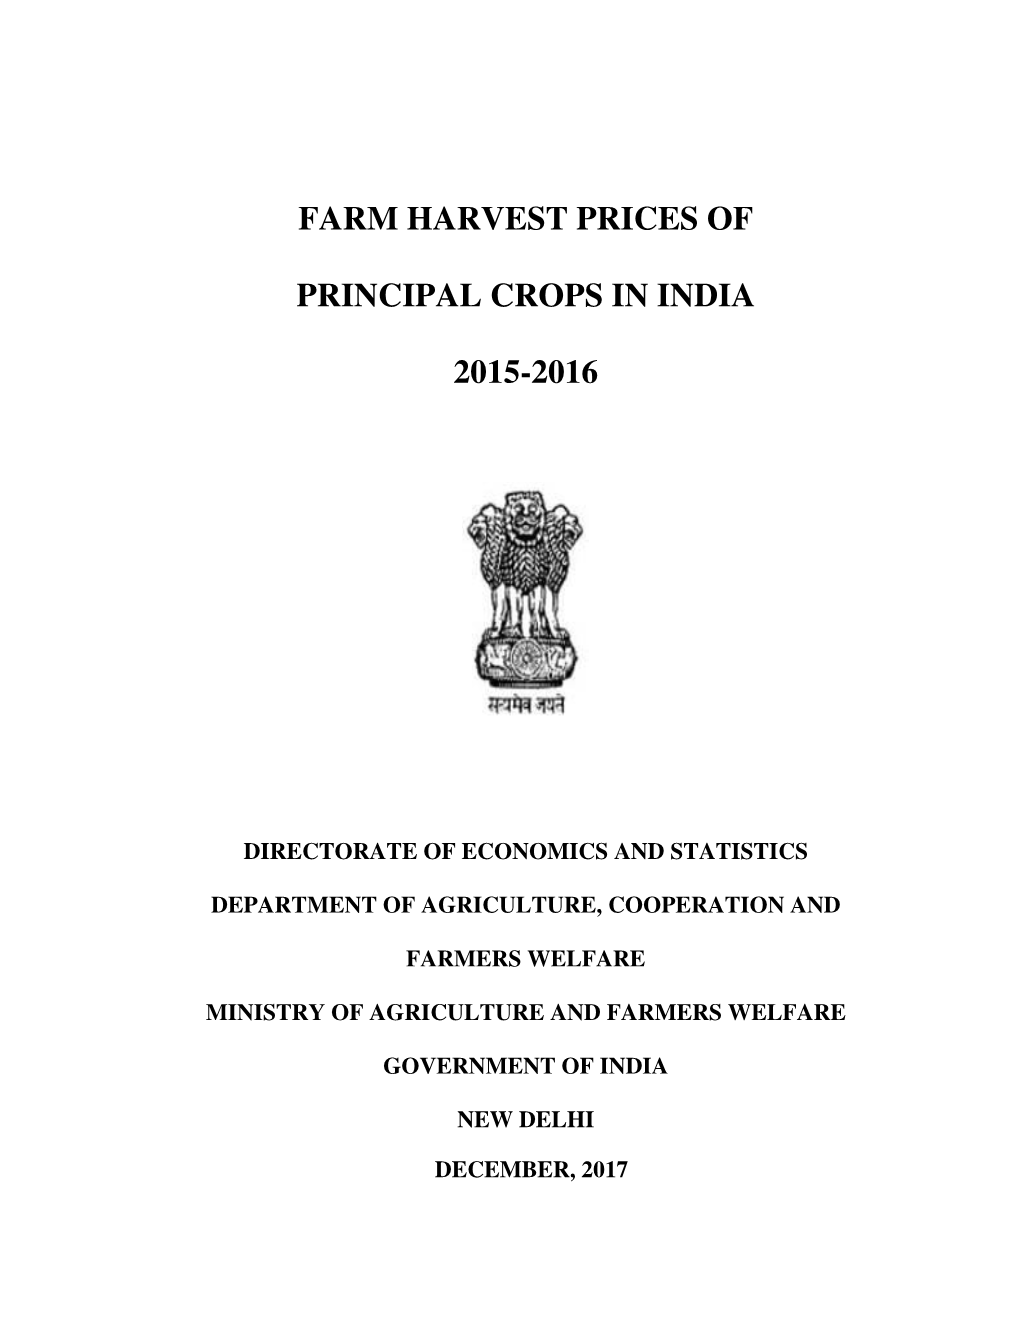 Farm Harvest Prices of Principal Crops in INDIA. State Wise (2015-16)